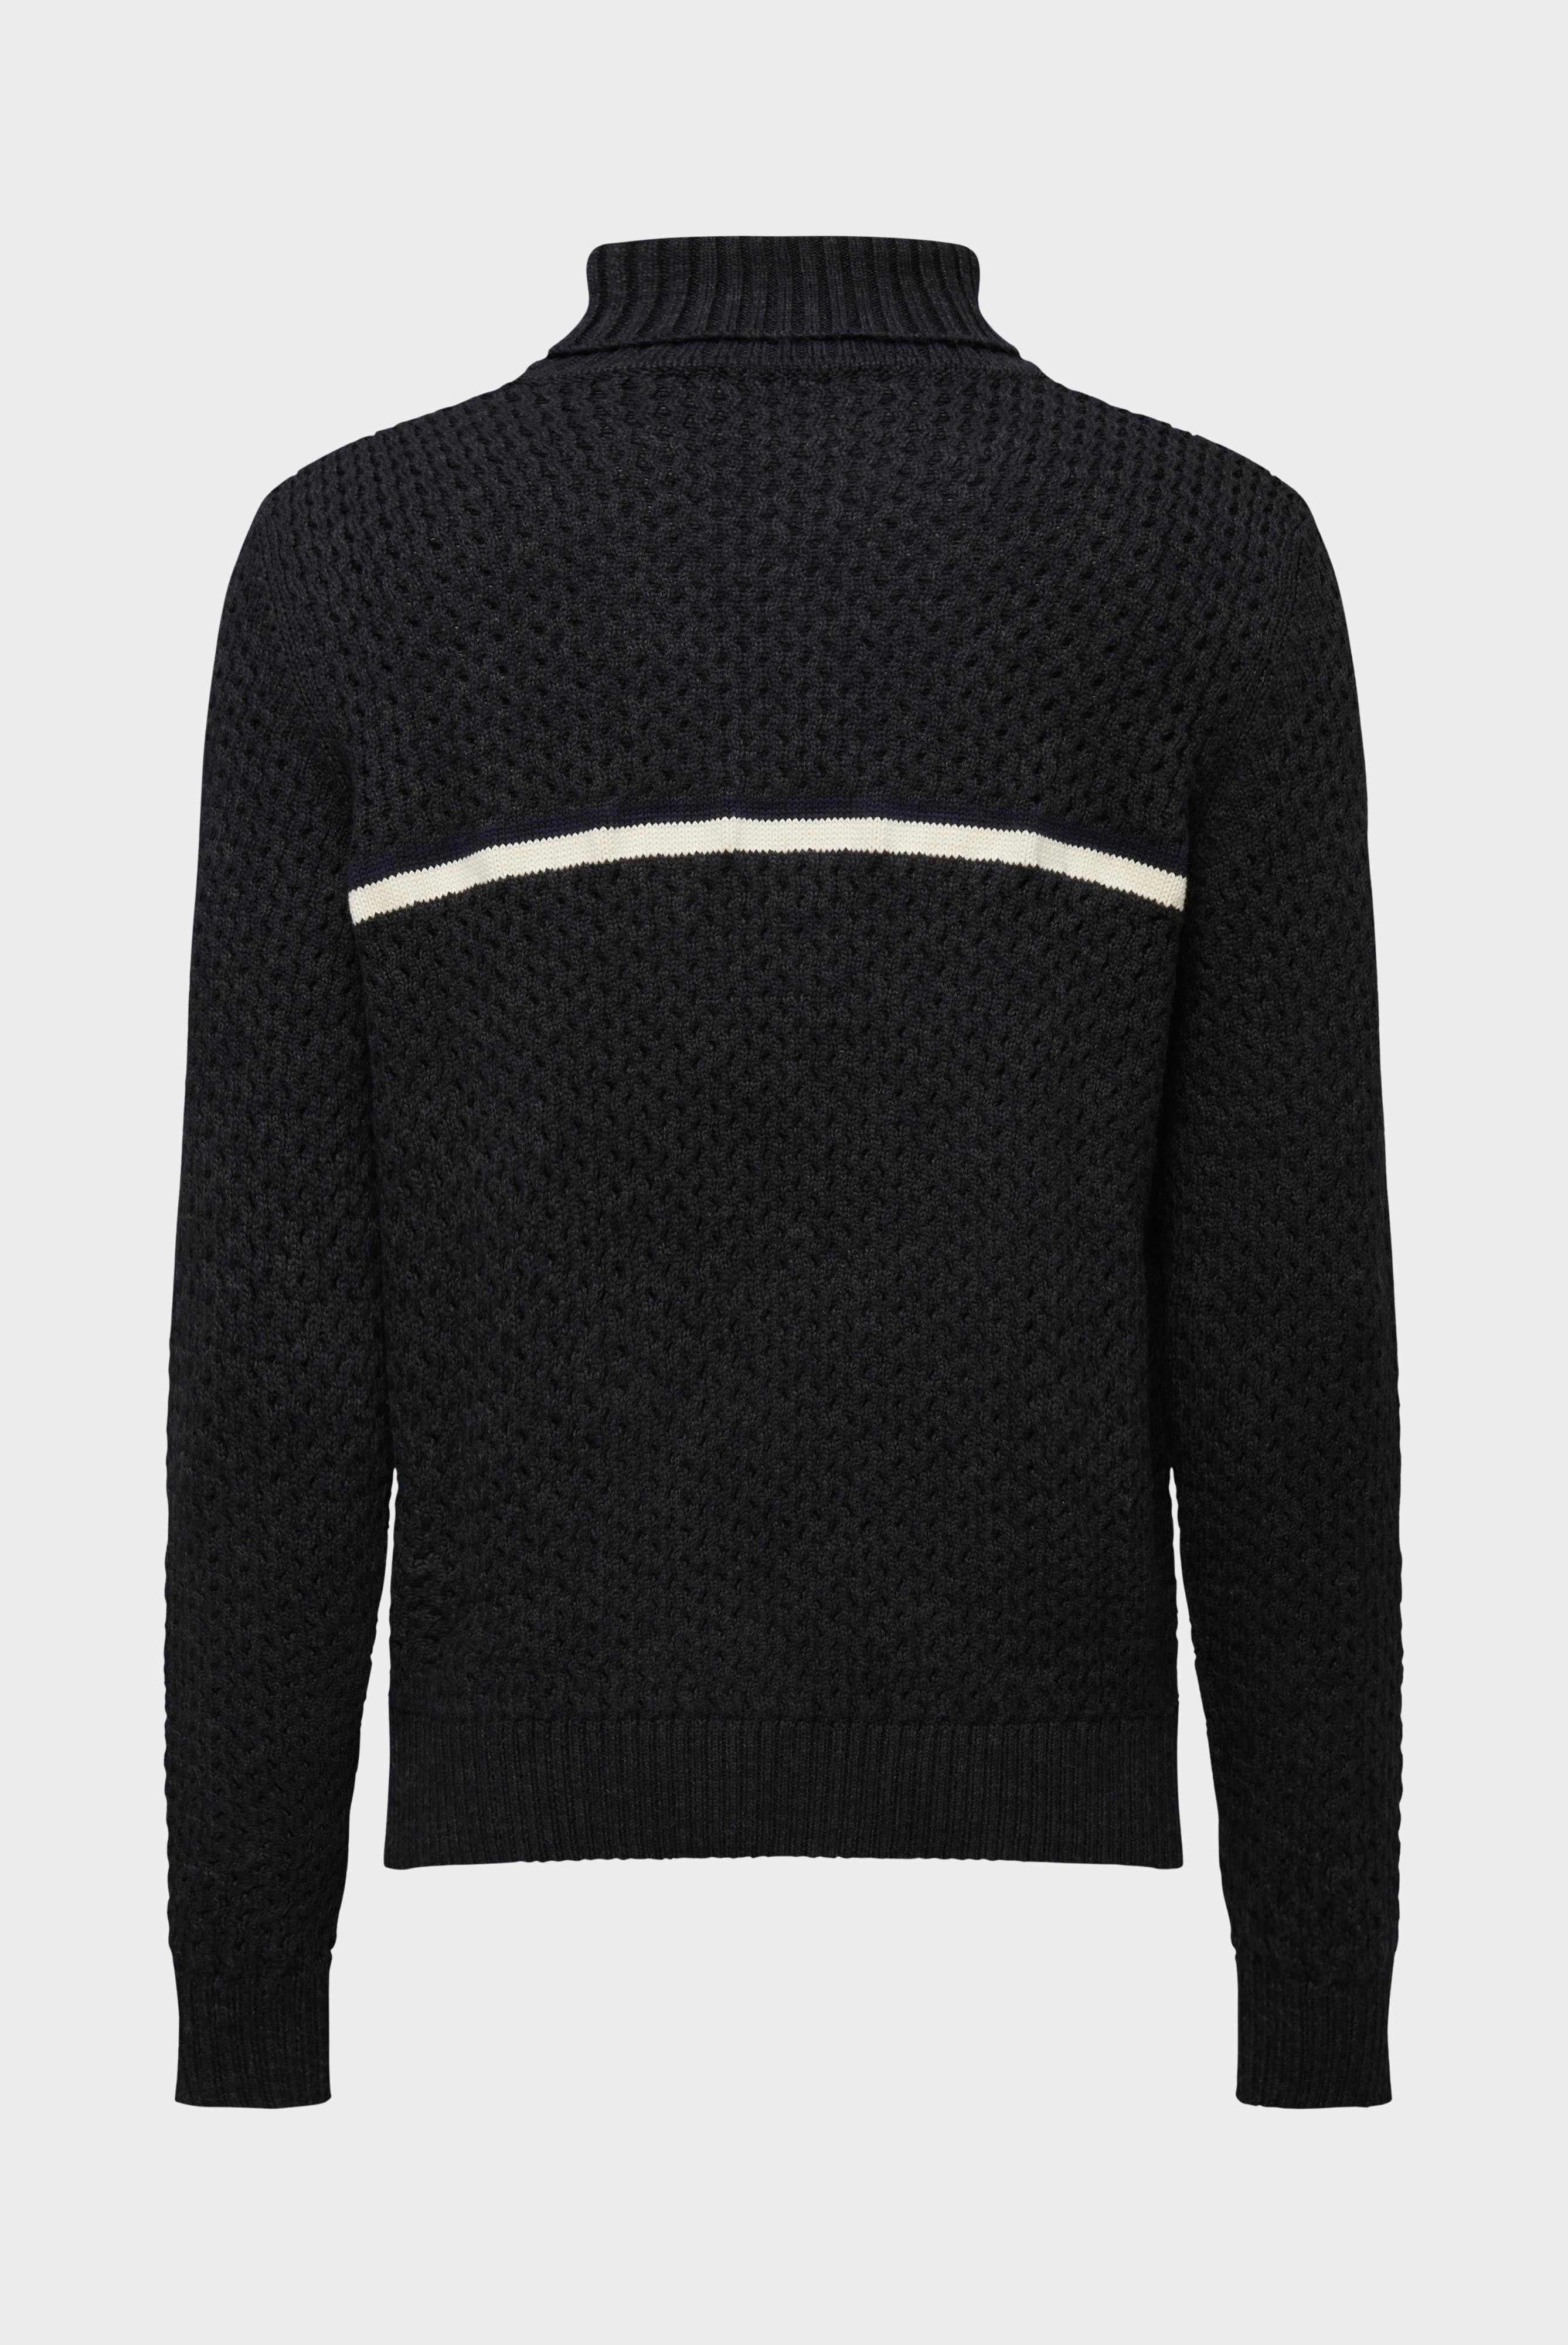 Sweaters & Cardigans+Turtleneck with Merino and Cotton+82.8631..S00241.097.S